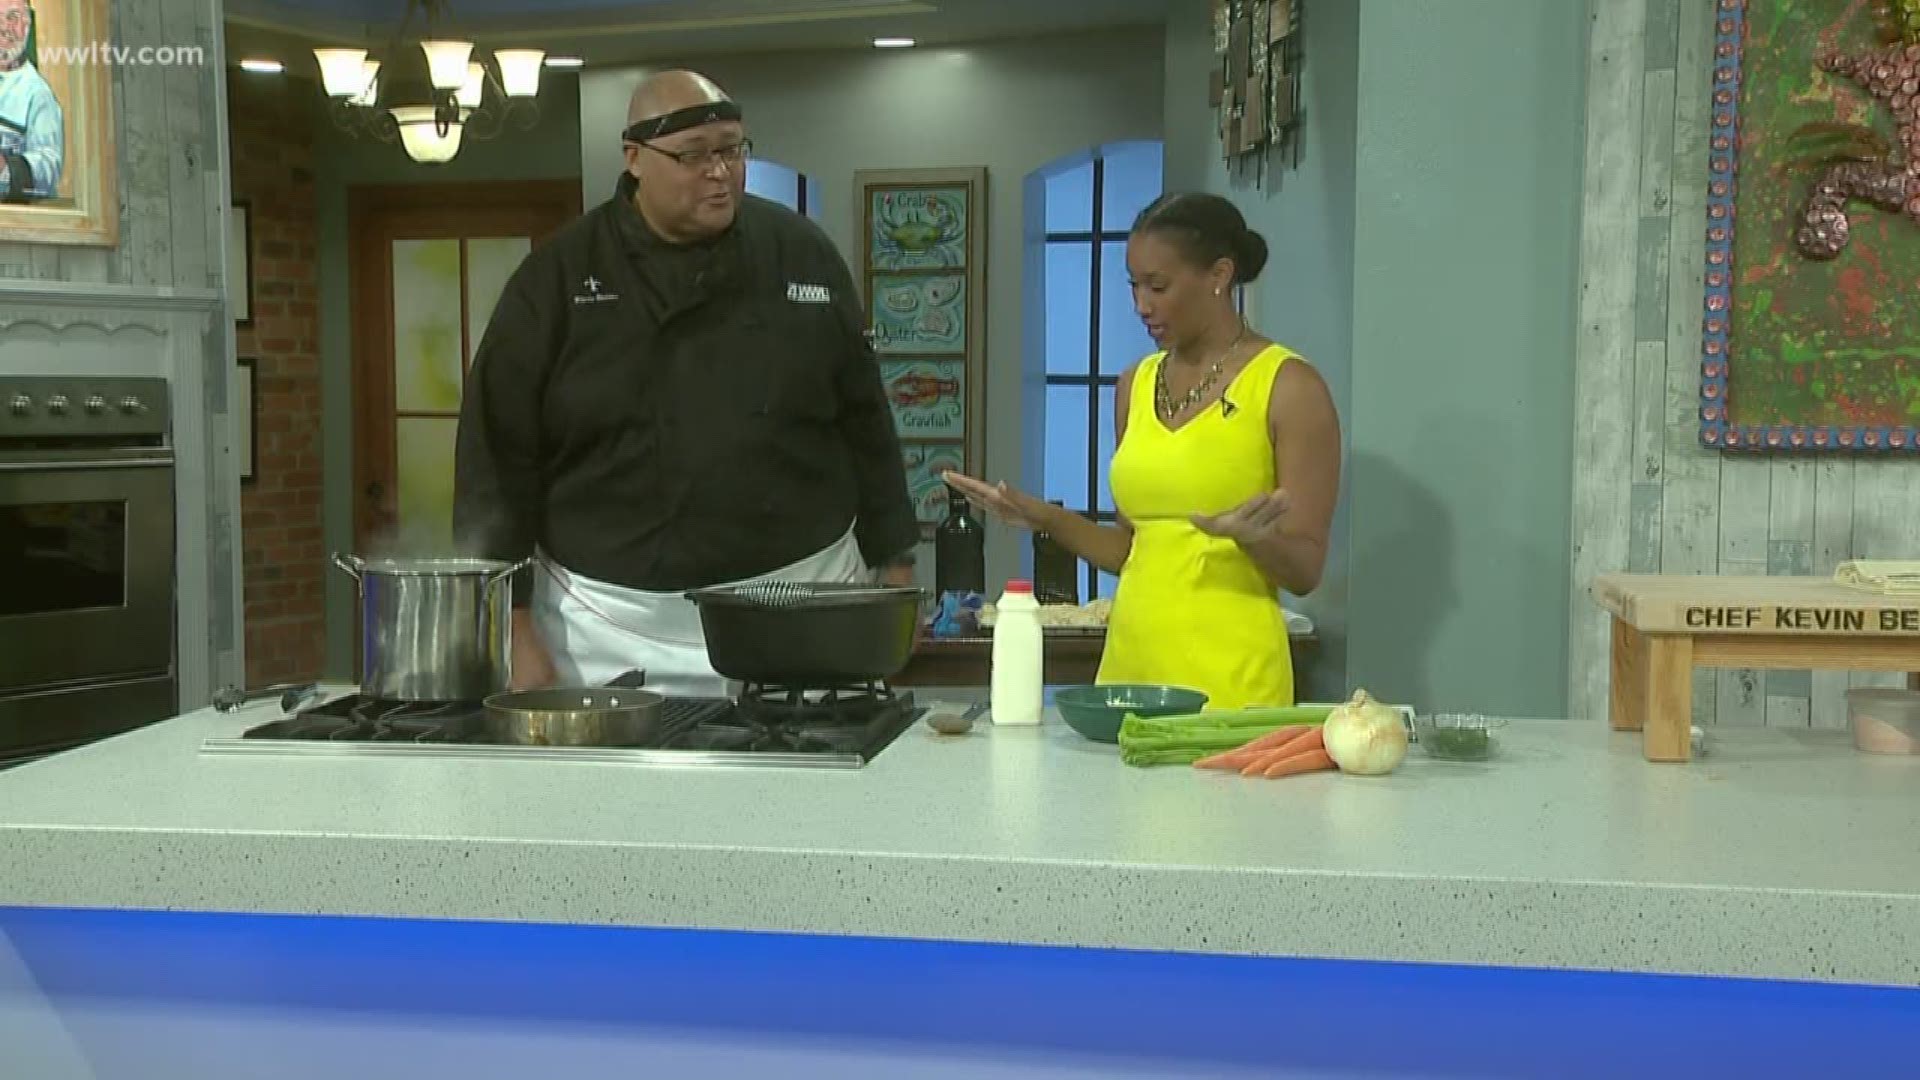 Chef Kevin Belton is cooking up his recipe of Bolognese sauce. 